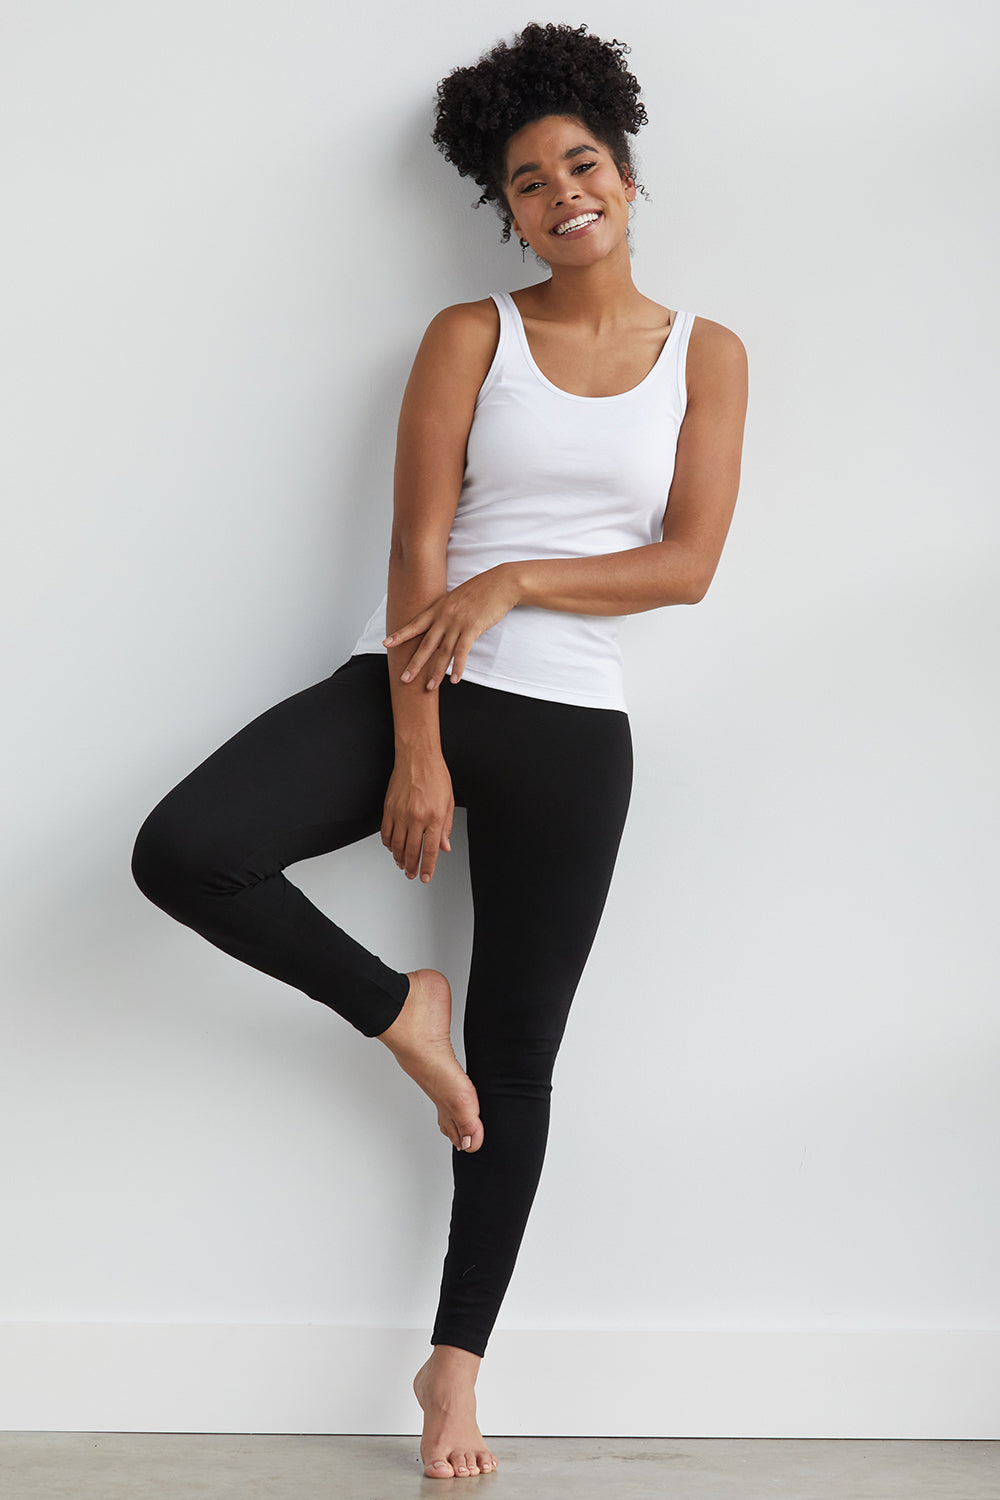 Cotton:On active leggings with pocket co-ord in khaki | ASOS